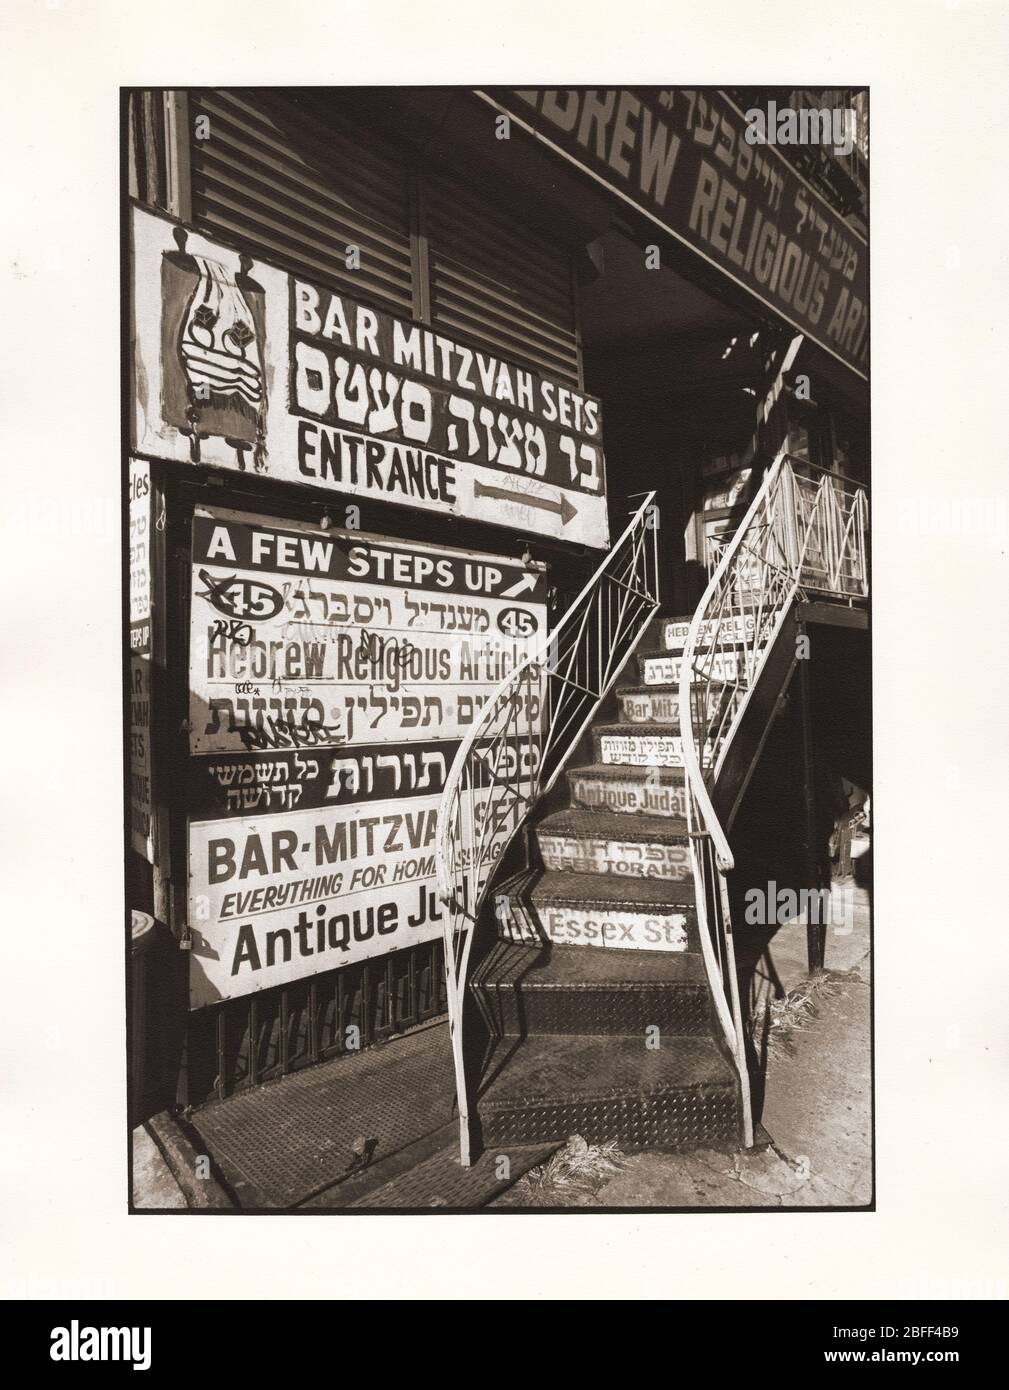 The stairway & signs for Mendel Weissberg's Hebrew Religious Articles store at 45 Essex St. on the Lower East Side of Manhattan, New York City. c Stock Photo